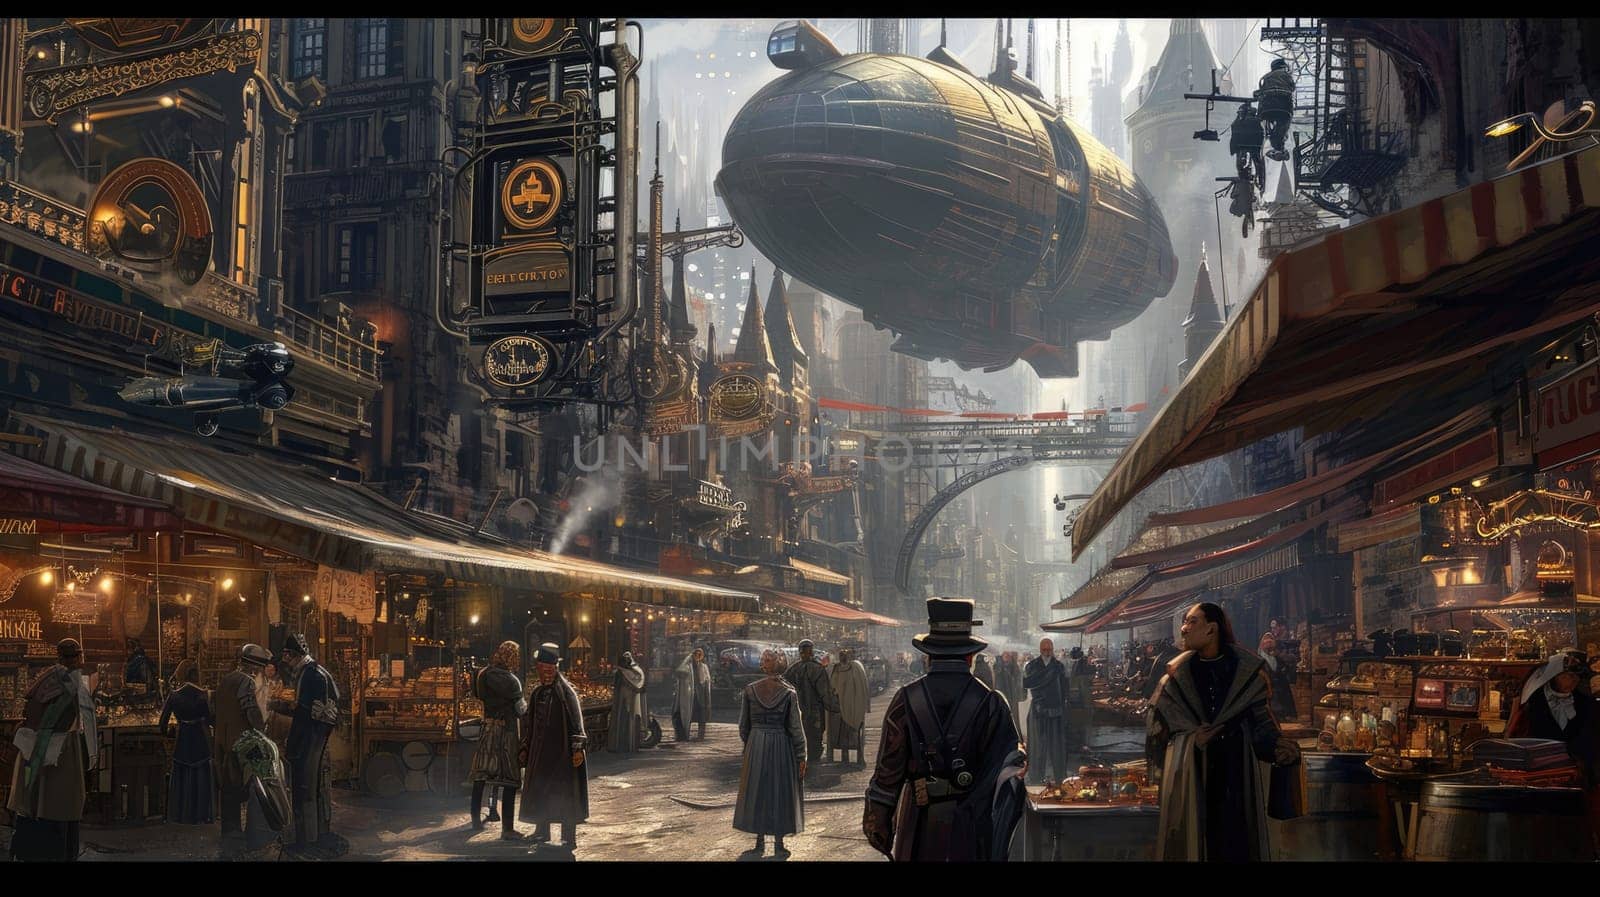 A fleet of steampunk airships hovers above a Victorian-inspired cityscape, enveloped in a golden mist at dawn. Resplendent.